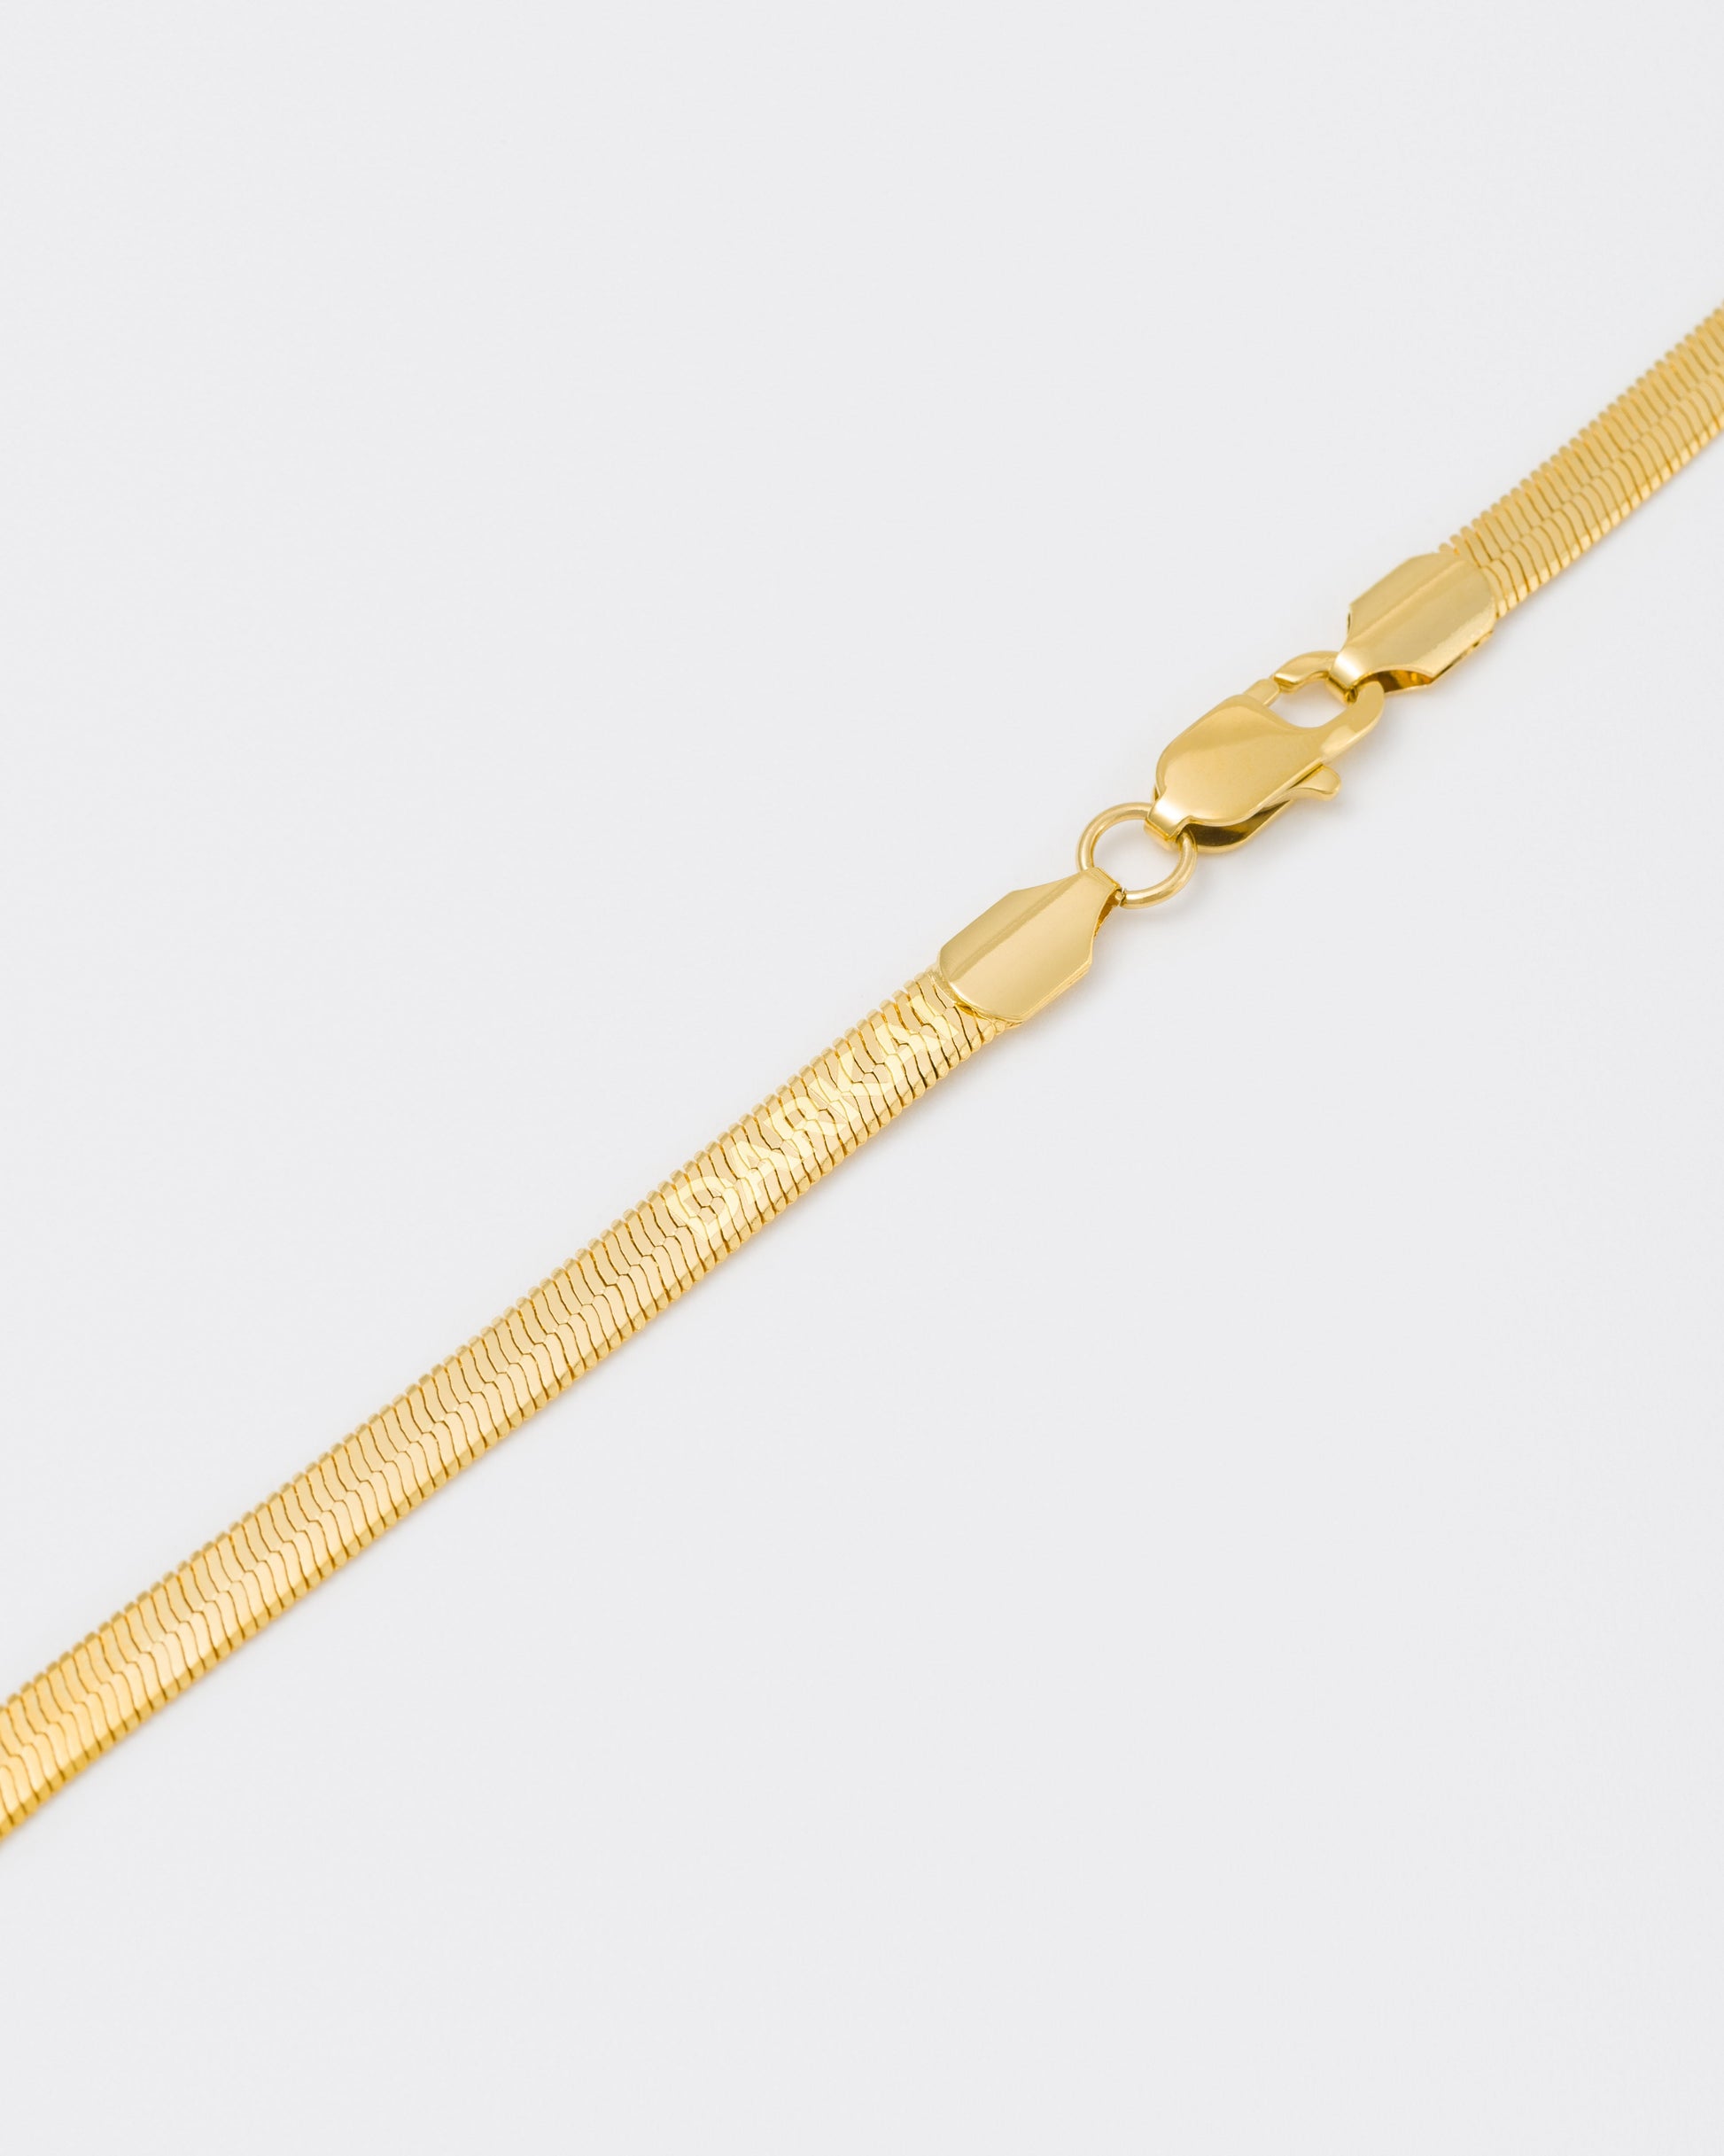 detail of 18k yellow gold coated herringbone chain necklace with lasered logo along the links and regular lobster clasp